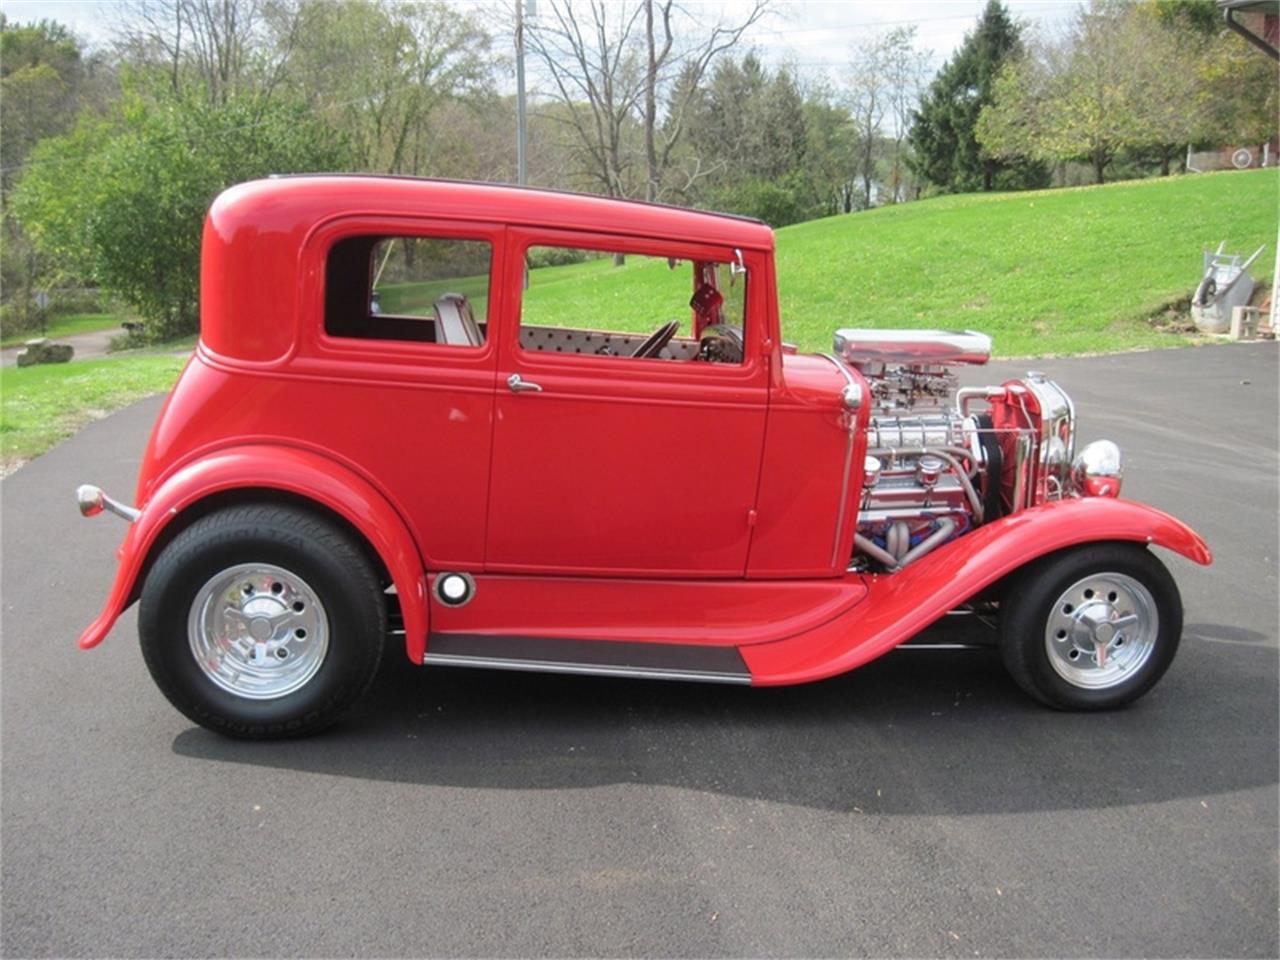 For Sale: 1931 Ford Victoria in Fayette City, Pennsylvania for sale in Fayette City, PA